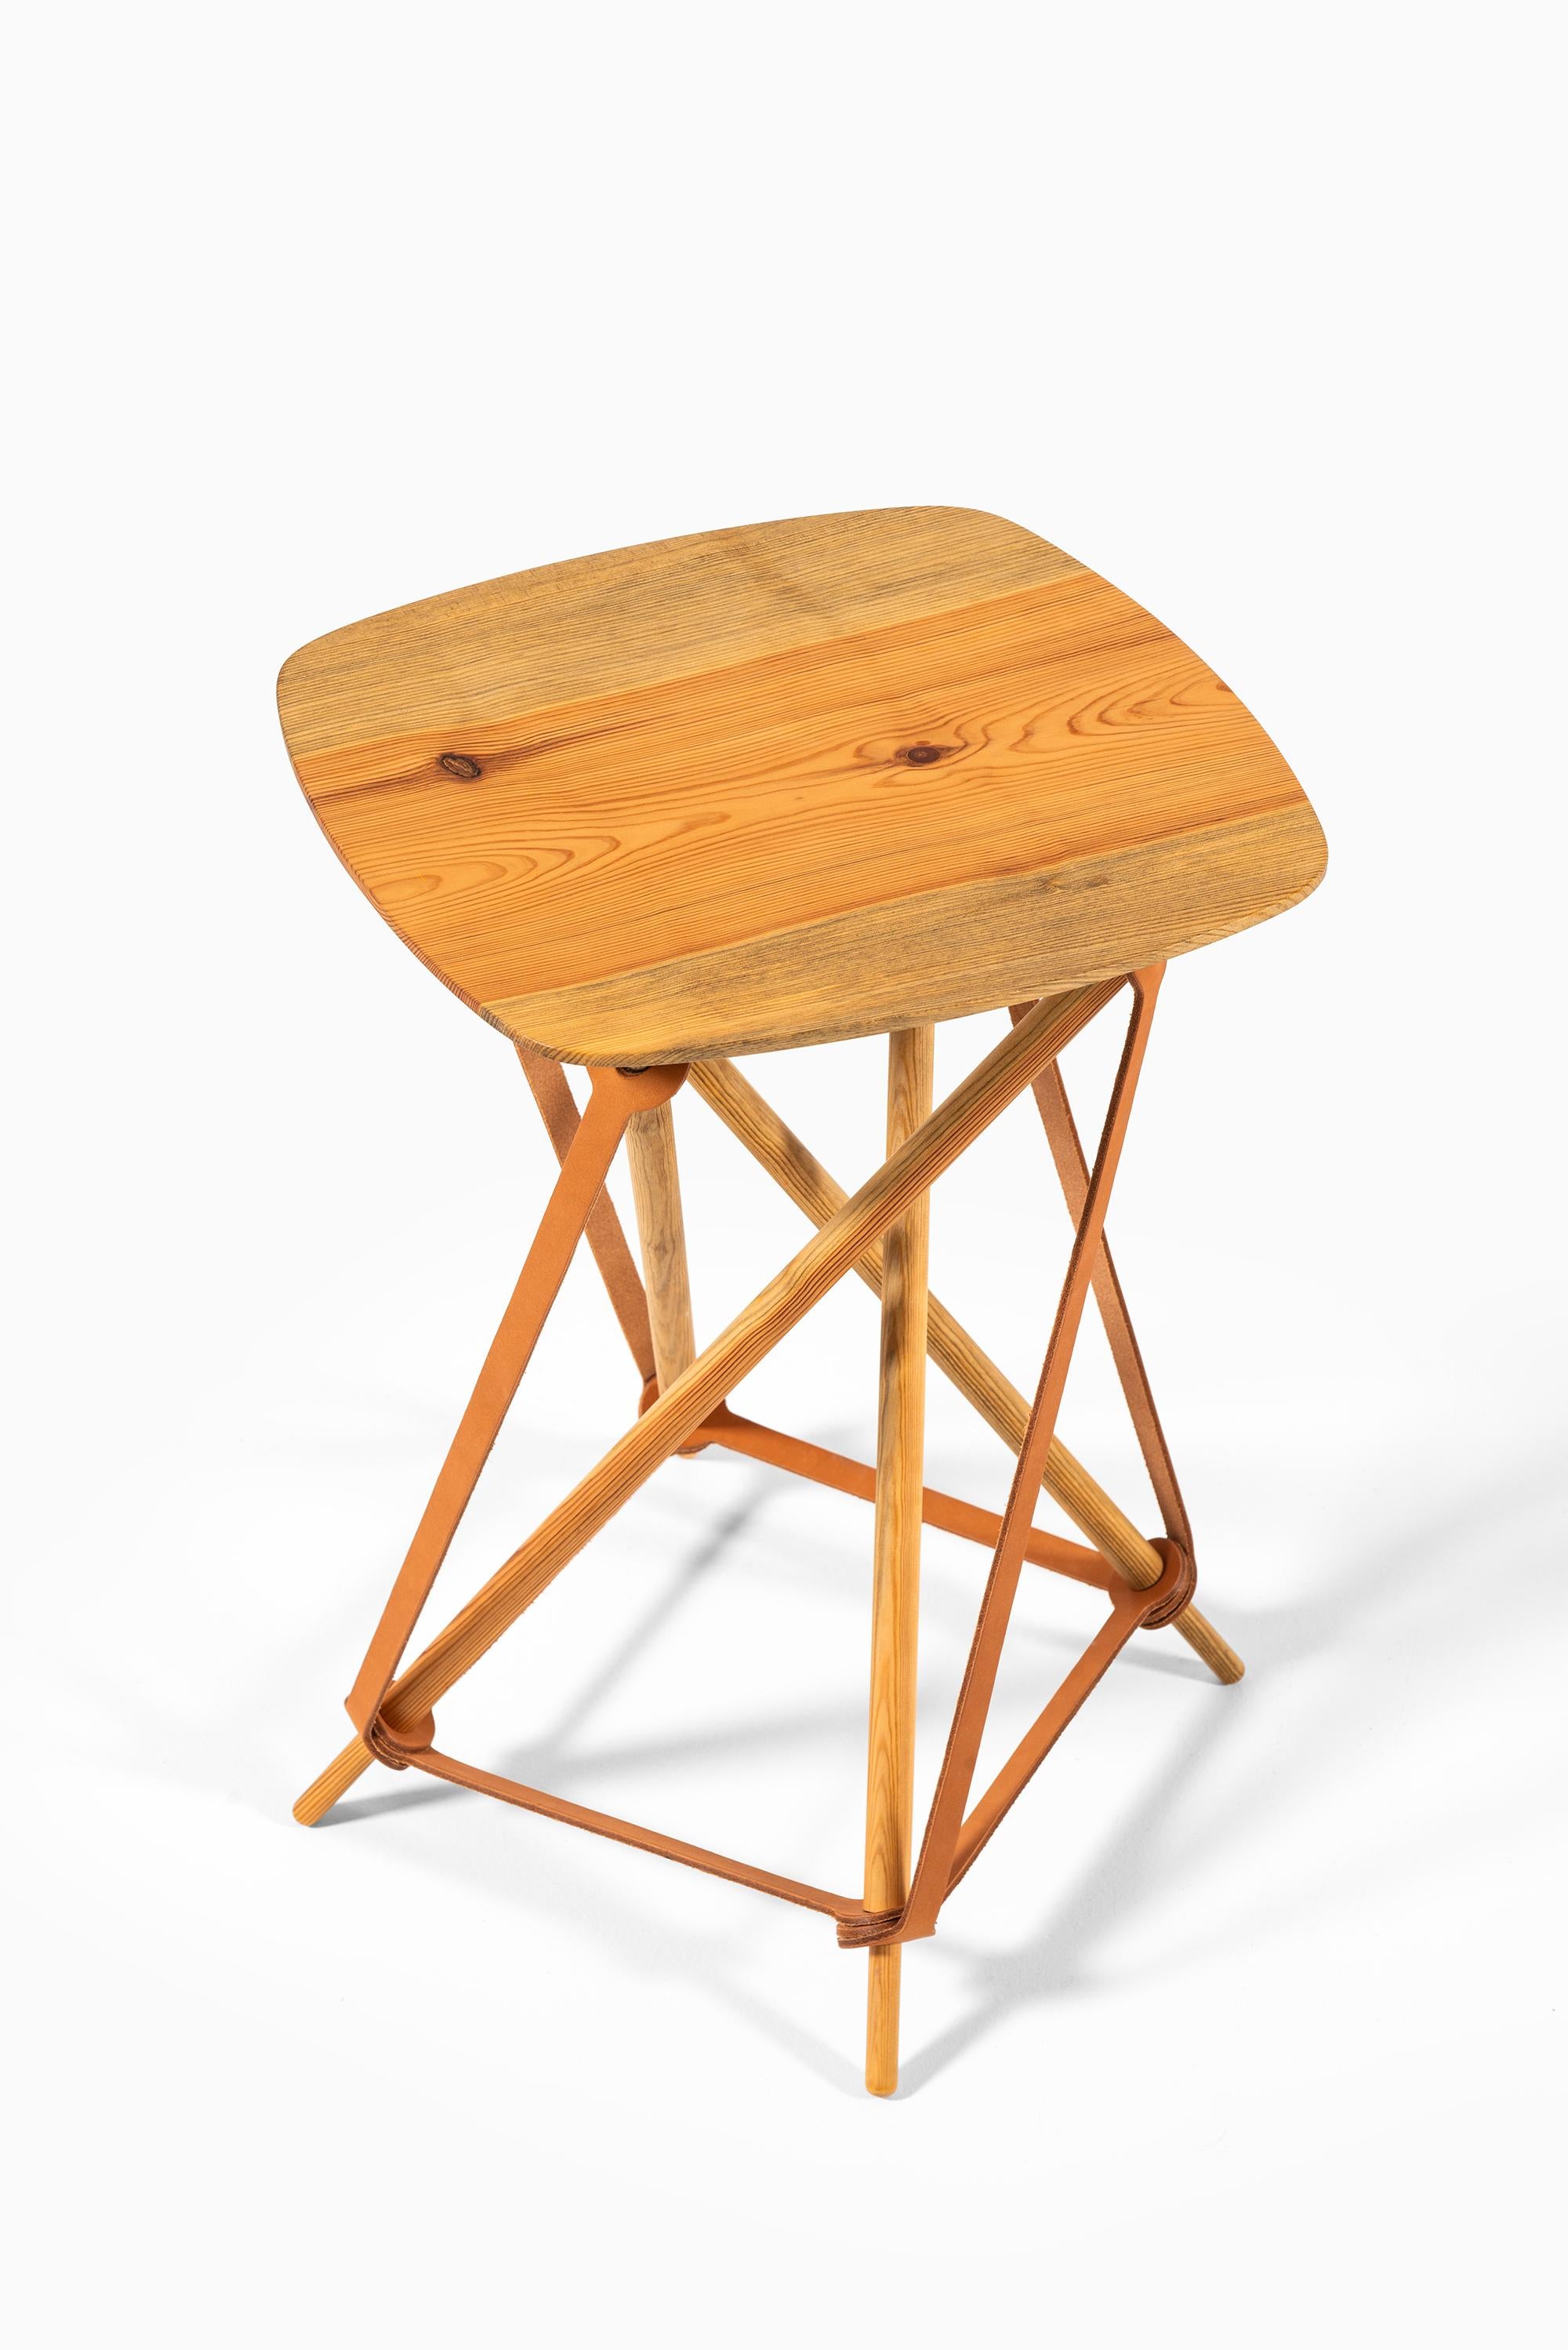 Stool / side table designed by Lith Lith Lundin. Produced in Sweden.